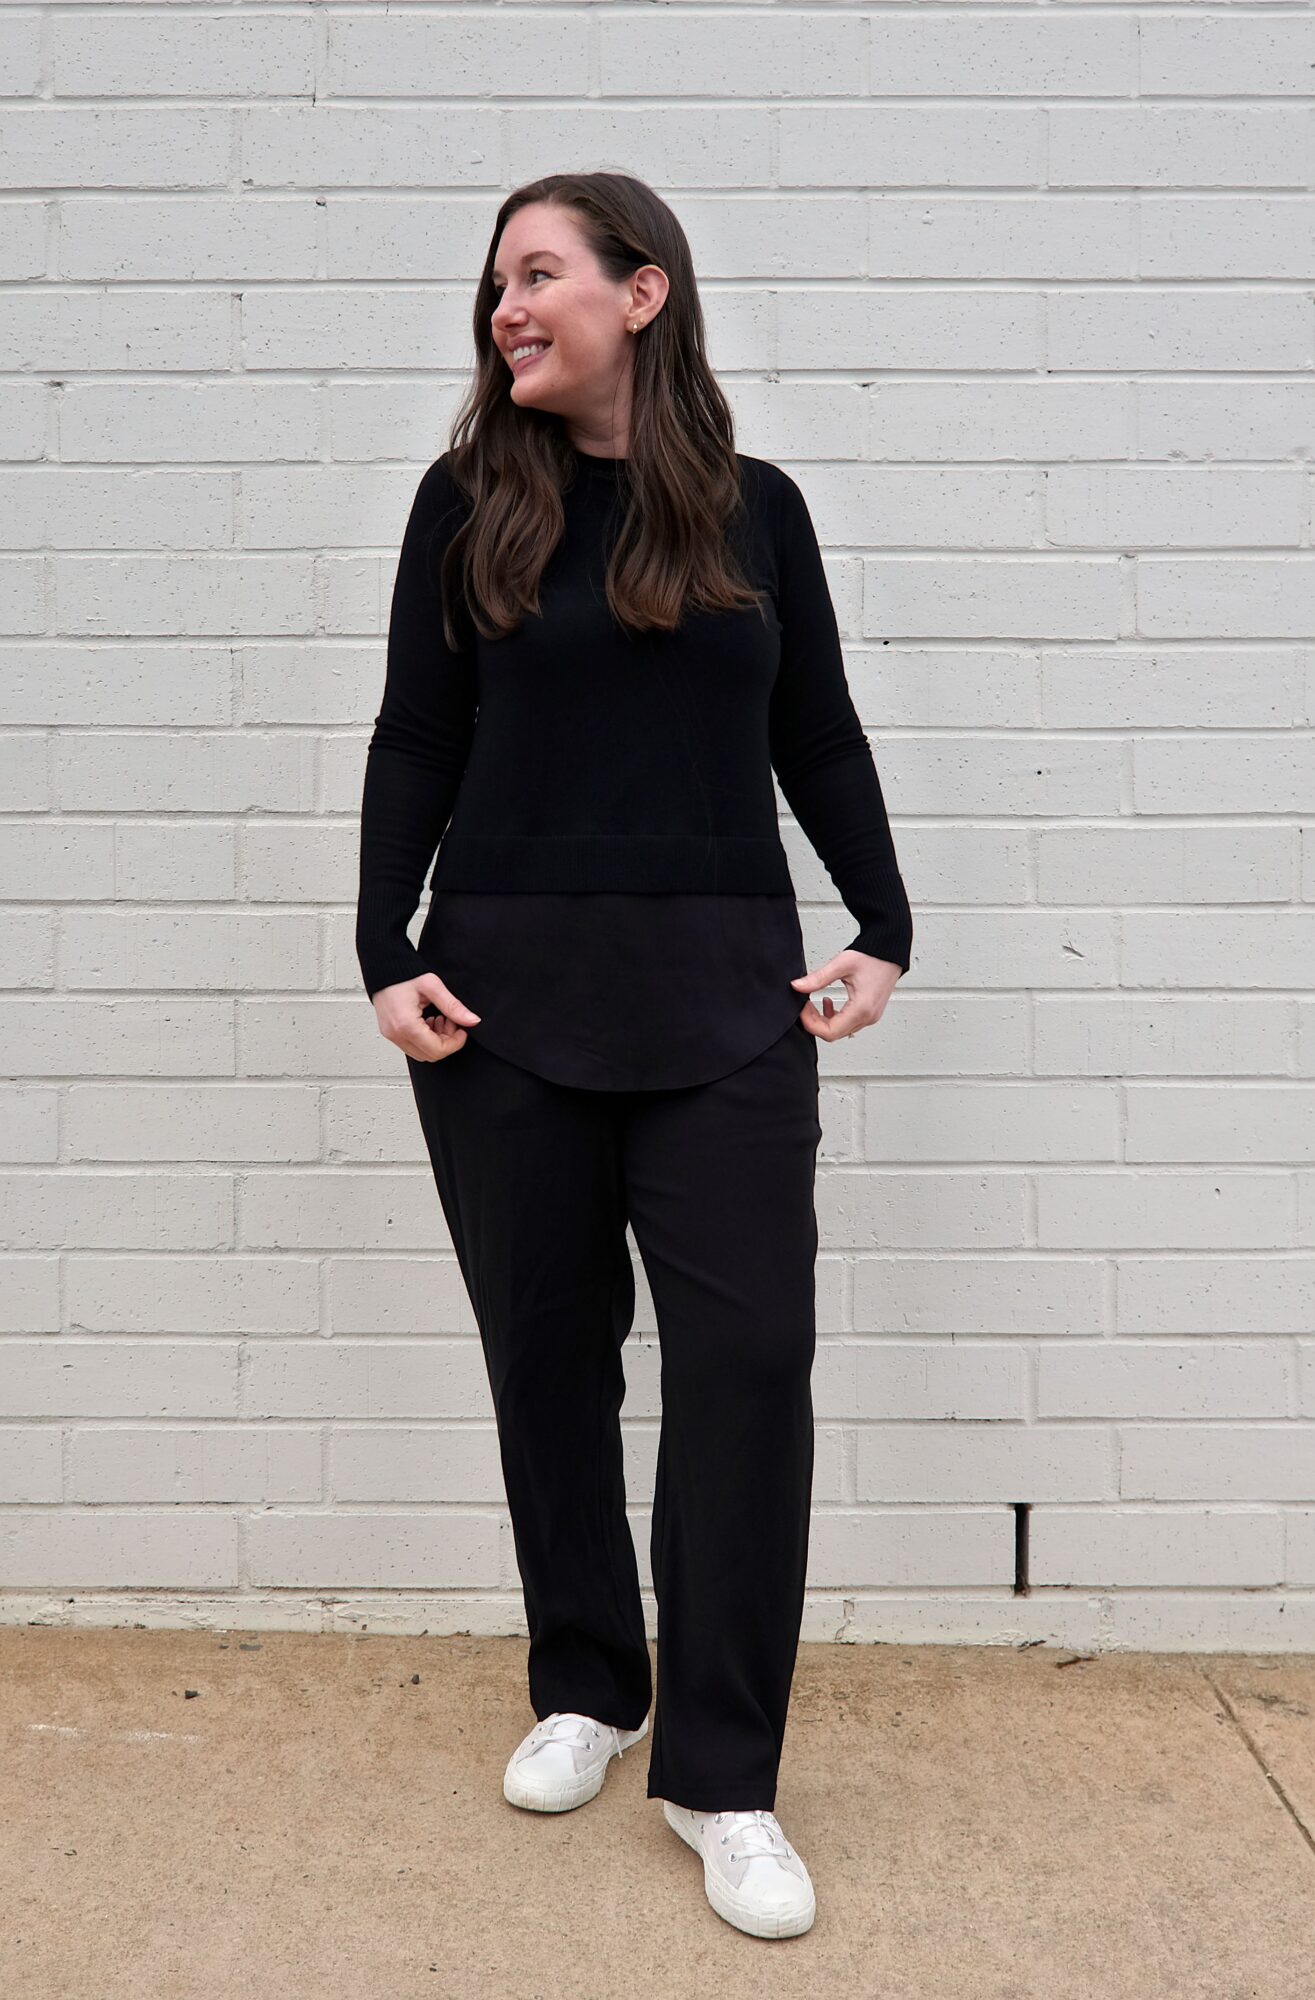 Alyssa wears a black sweater with a mock-shirttail hanging out